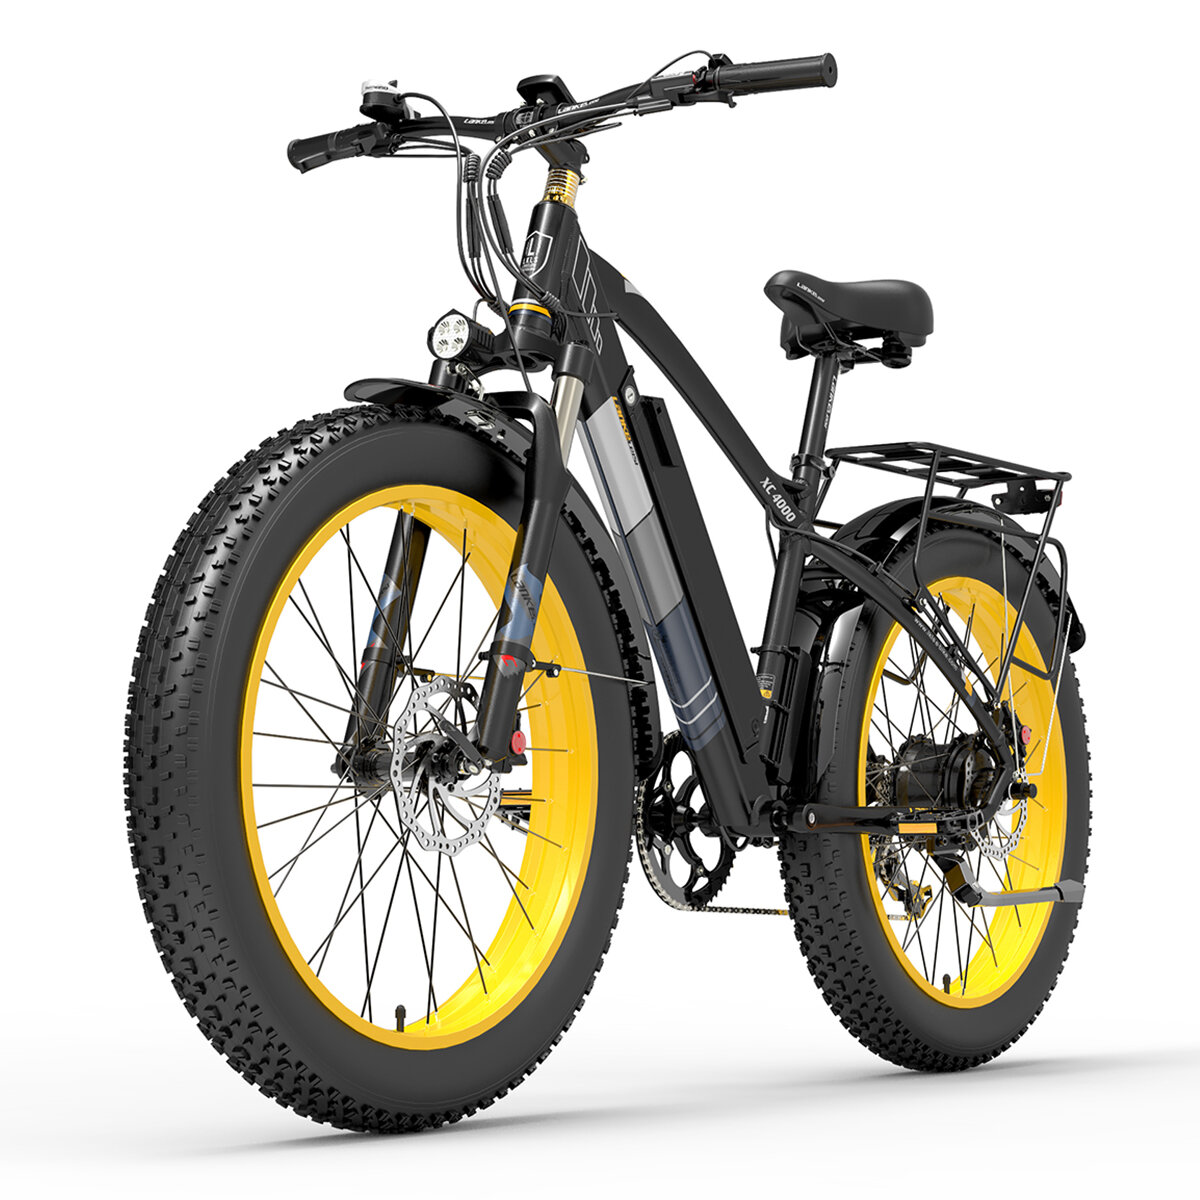 [EU Direct] LANKELEISI XC4000 14.5Ah 48V 1000W Electric Bicycle 26 Inches 100-120km Mileage Range Max Load 200kg